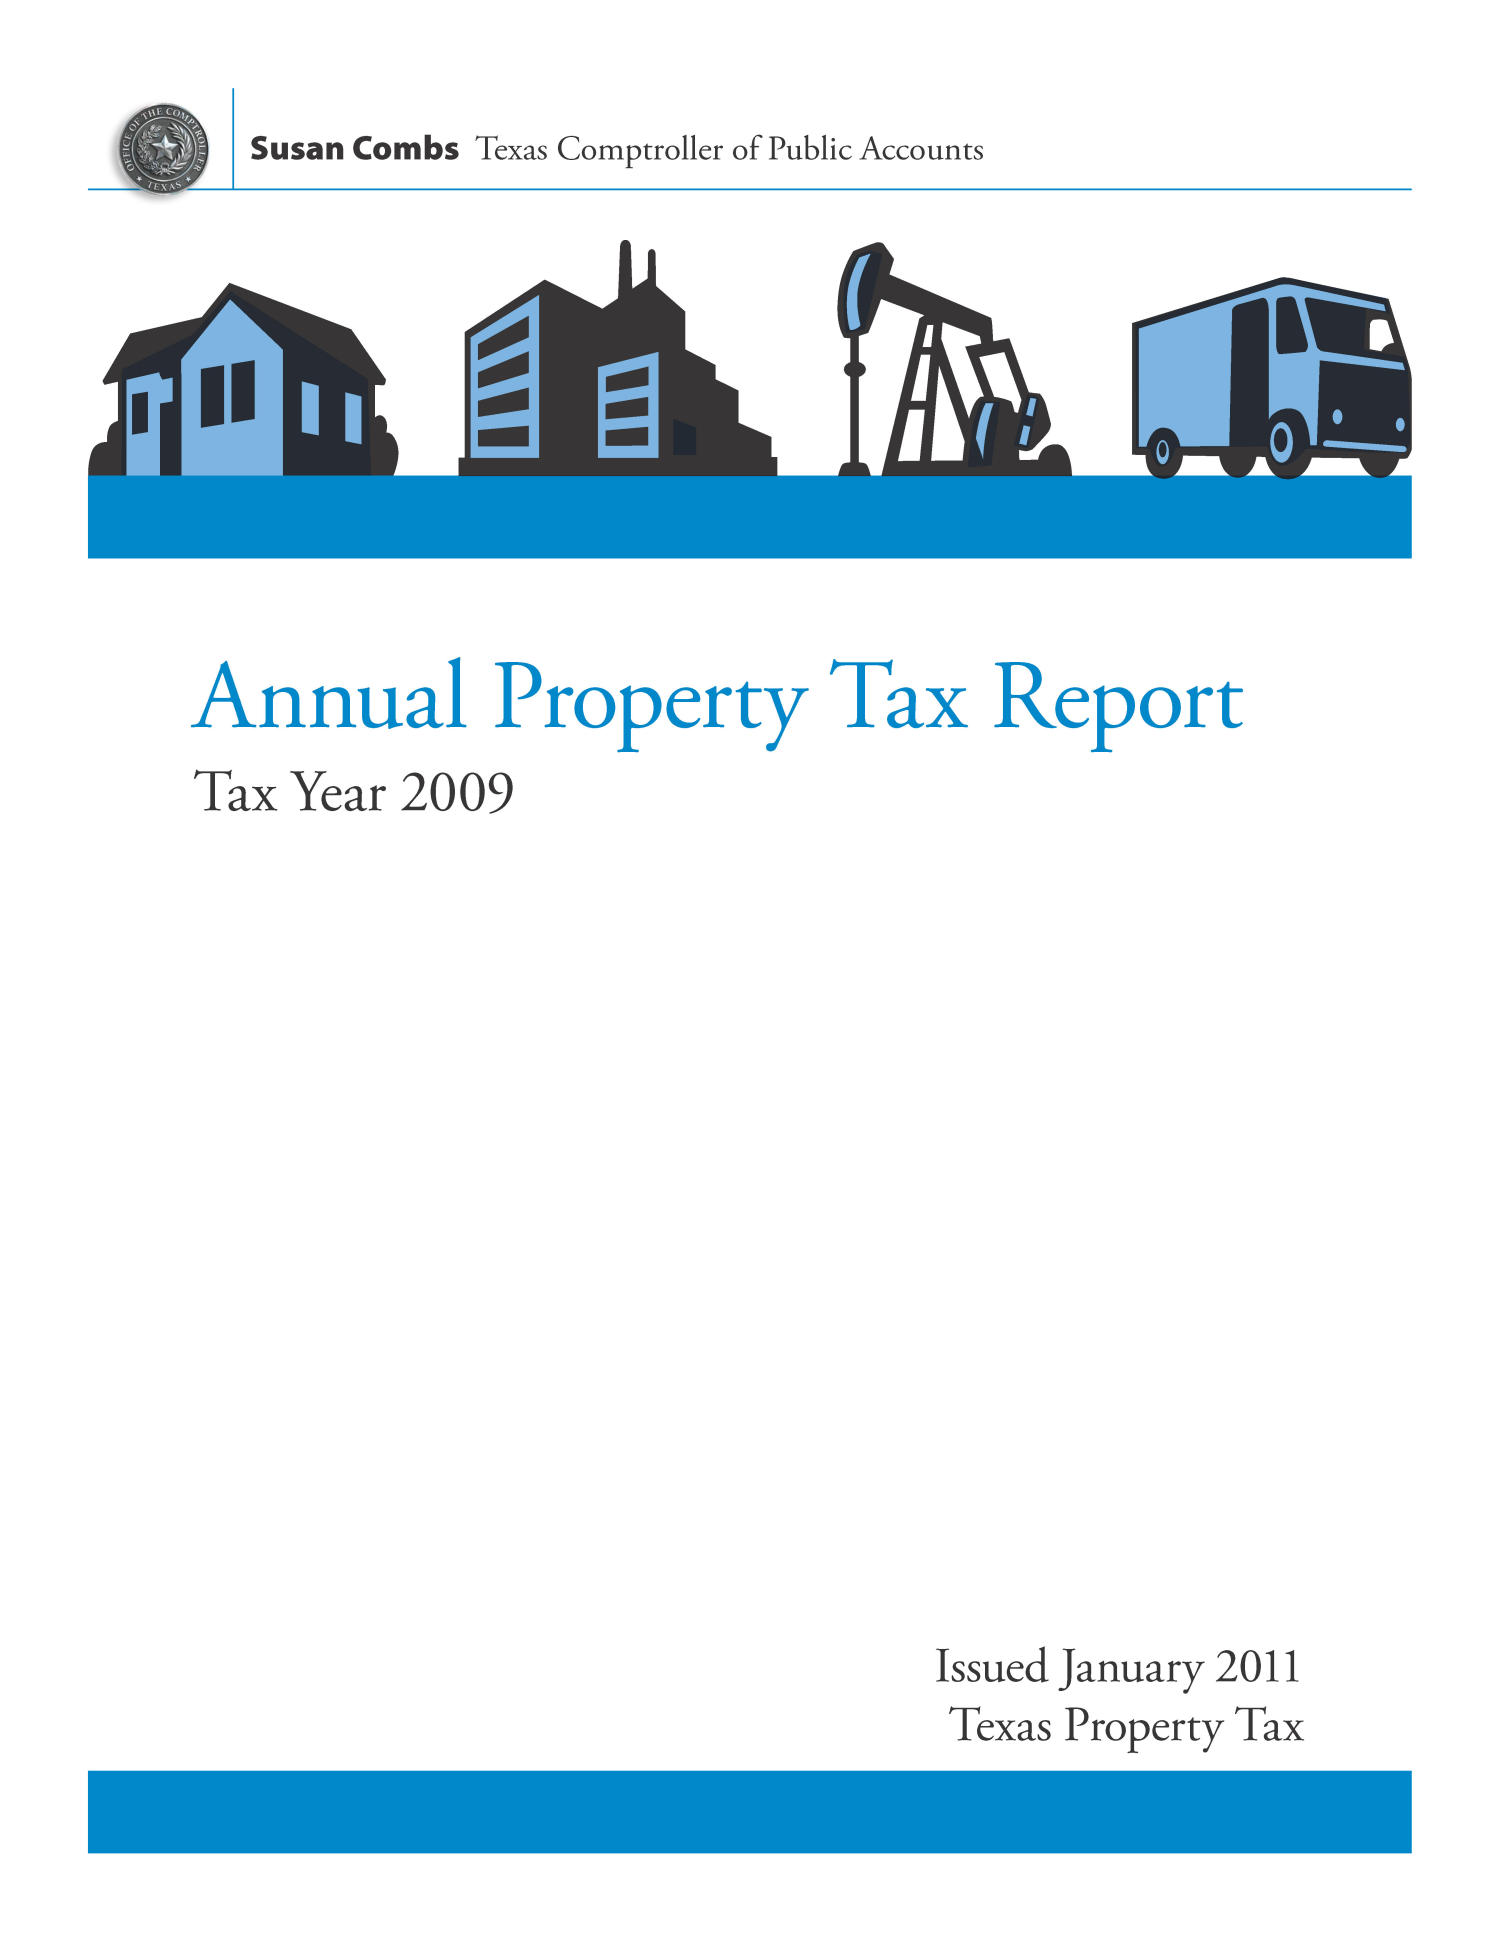 Texas Annual Property Tax Report: Tax Year 2009
                                                
                                                    Front Cover
                                                